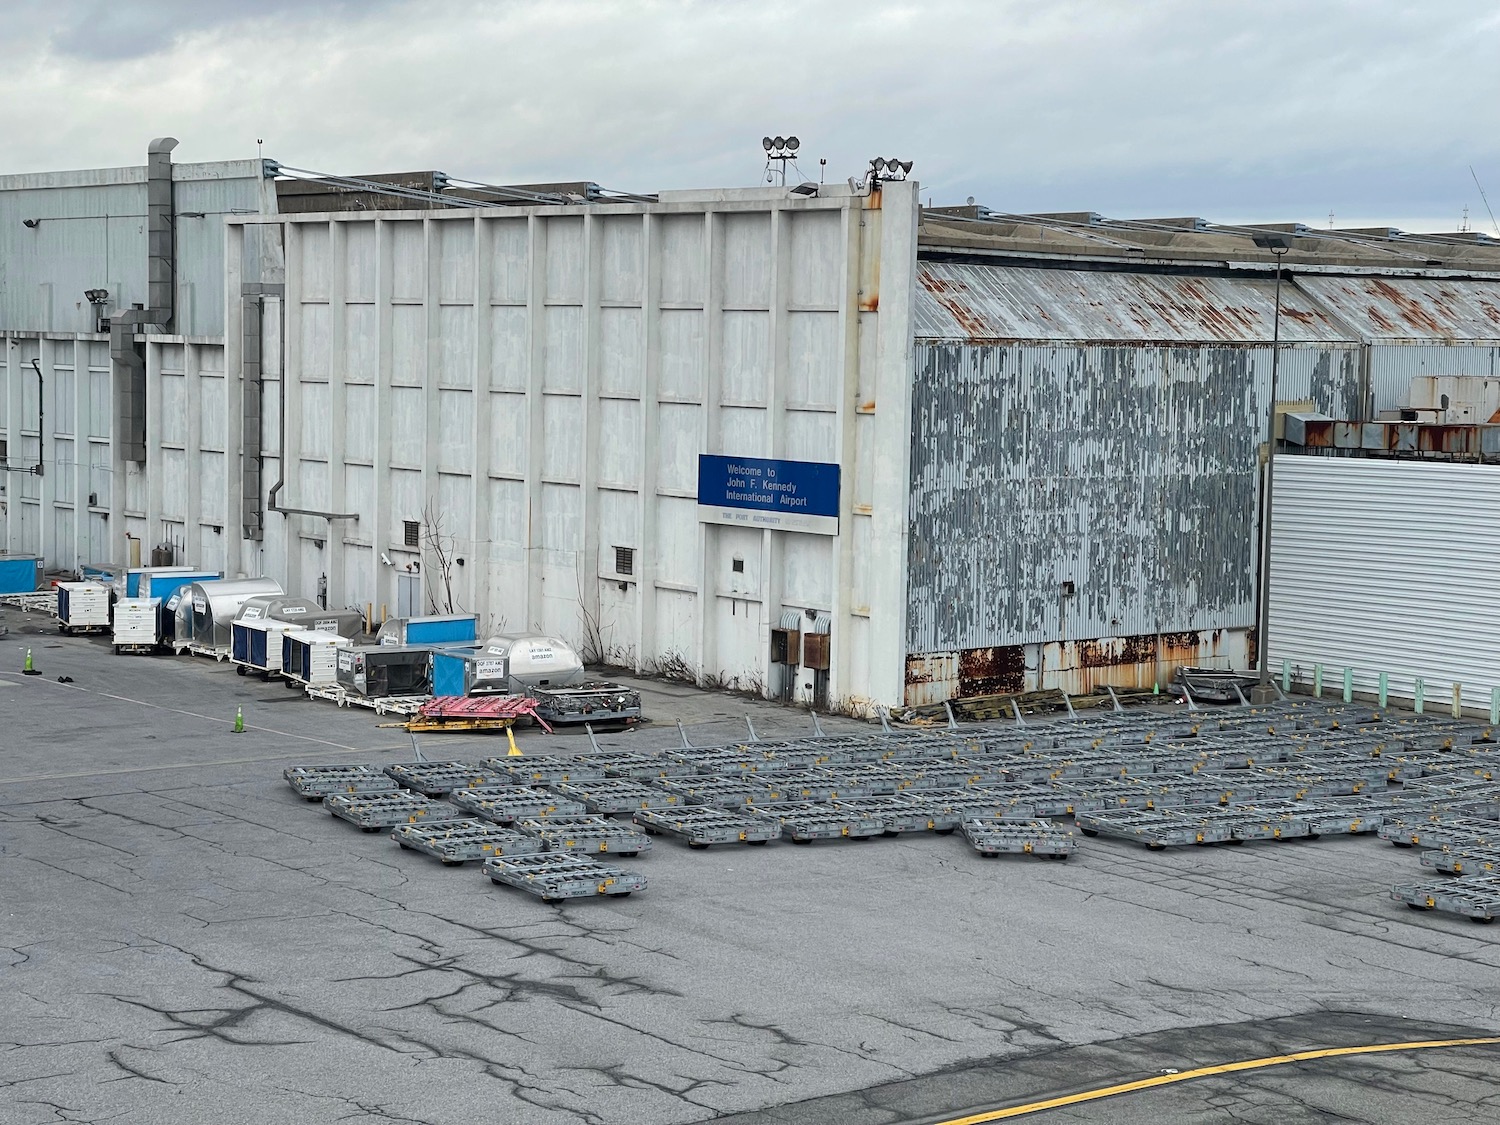 a large warehouse with many metal containers